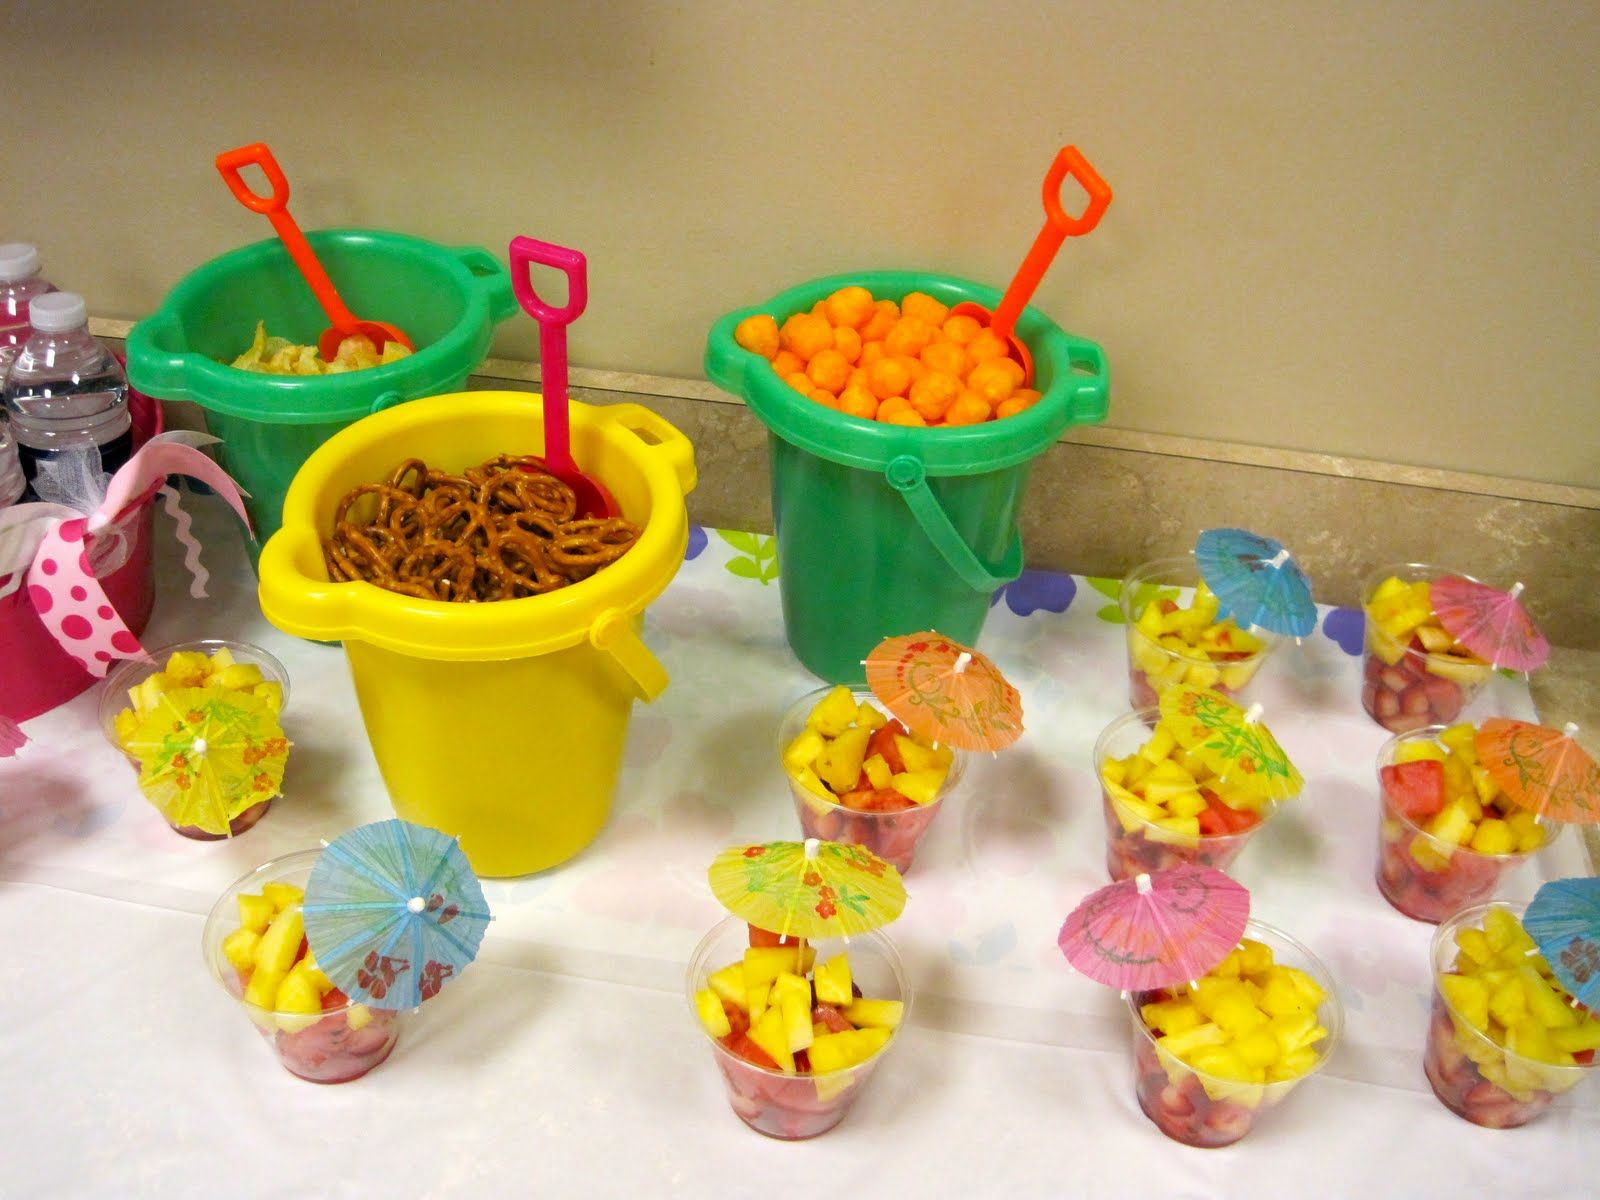 Beach Party Ideas For Preschoolers
 Cute for a beach party at the end of the school year